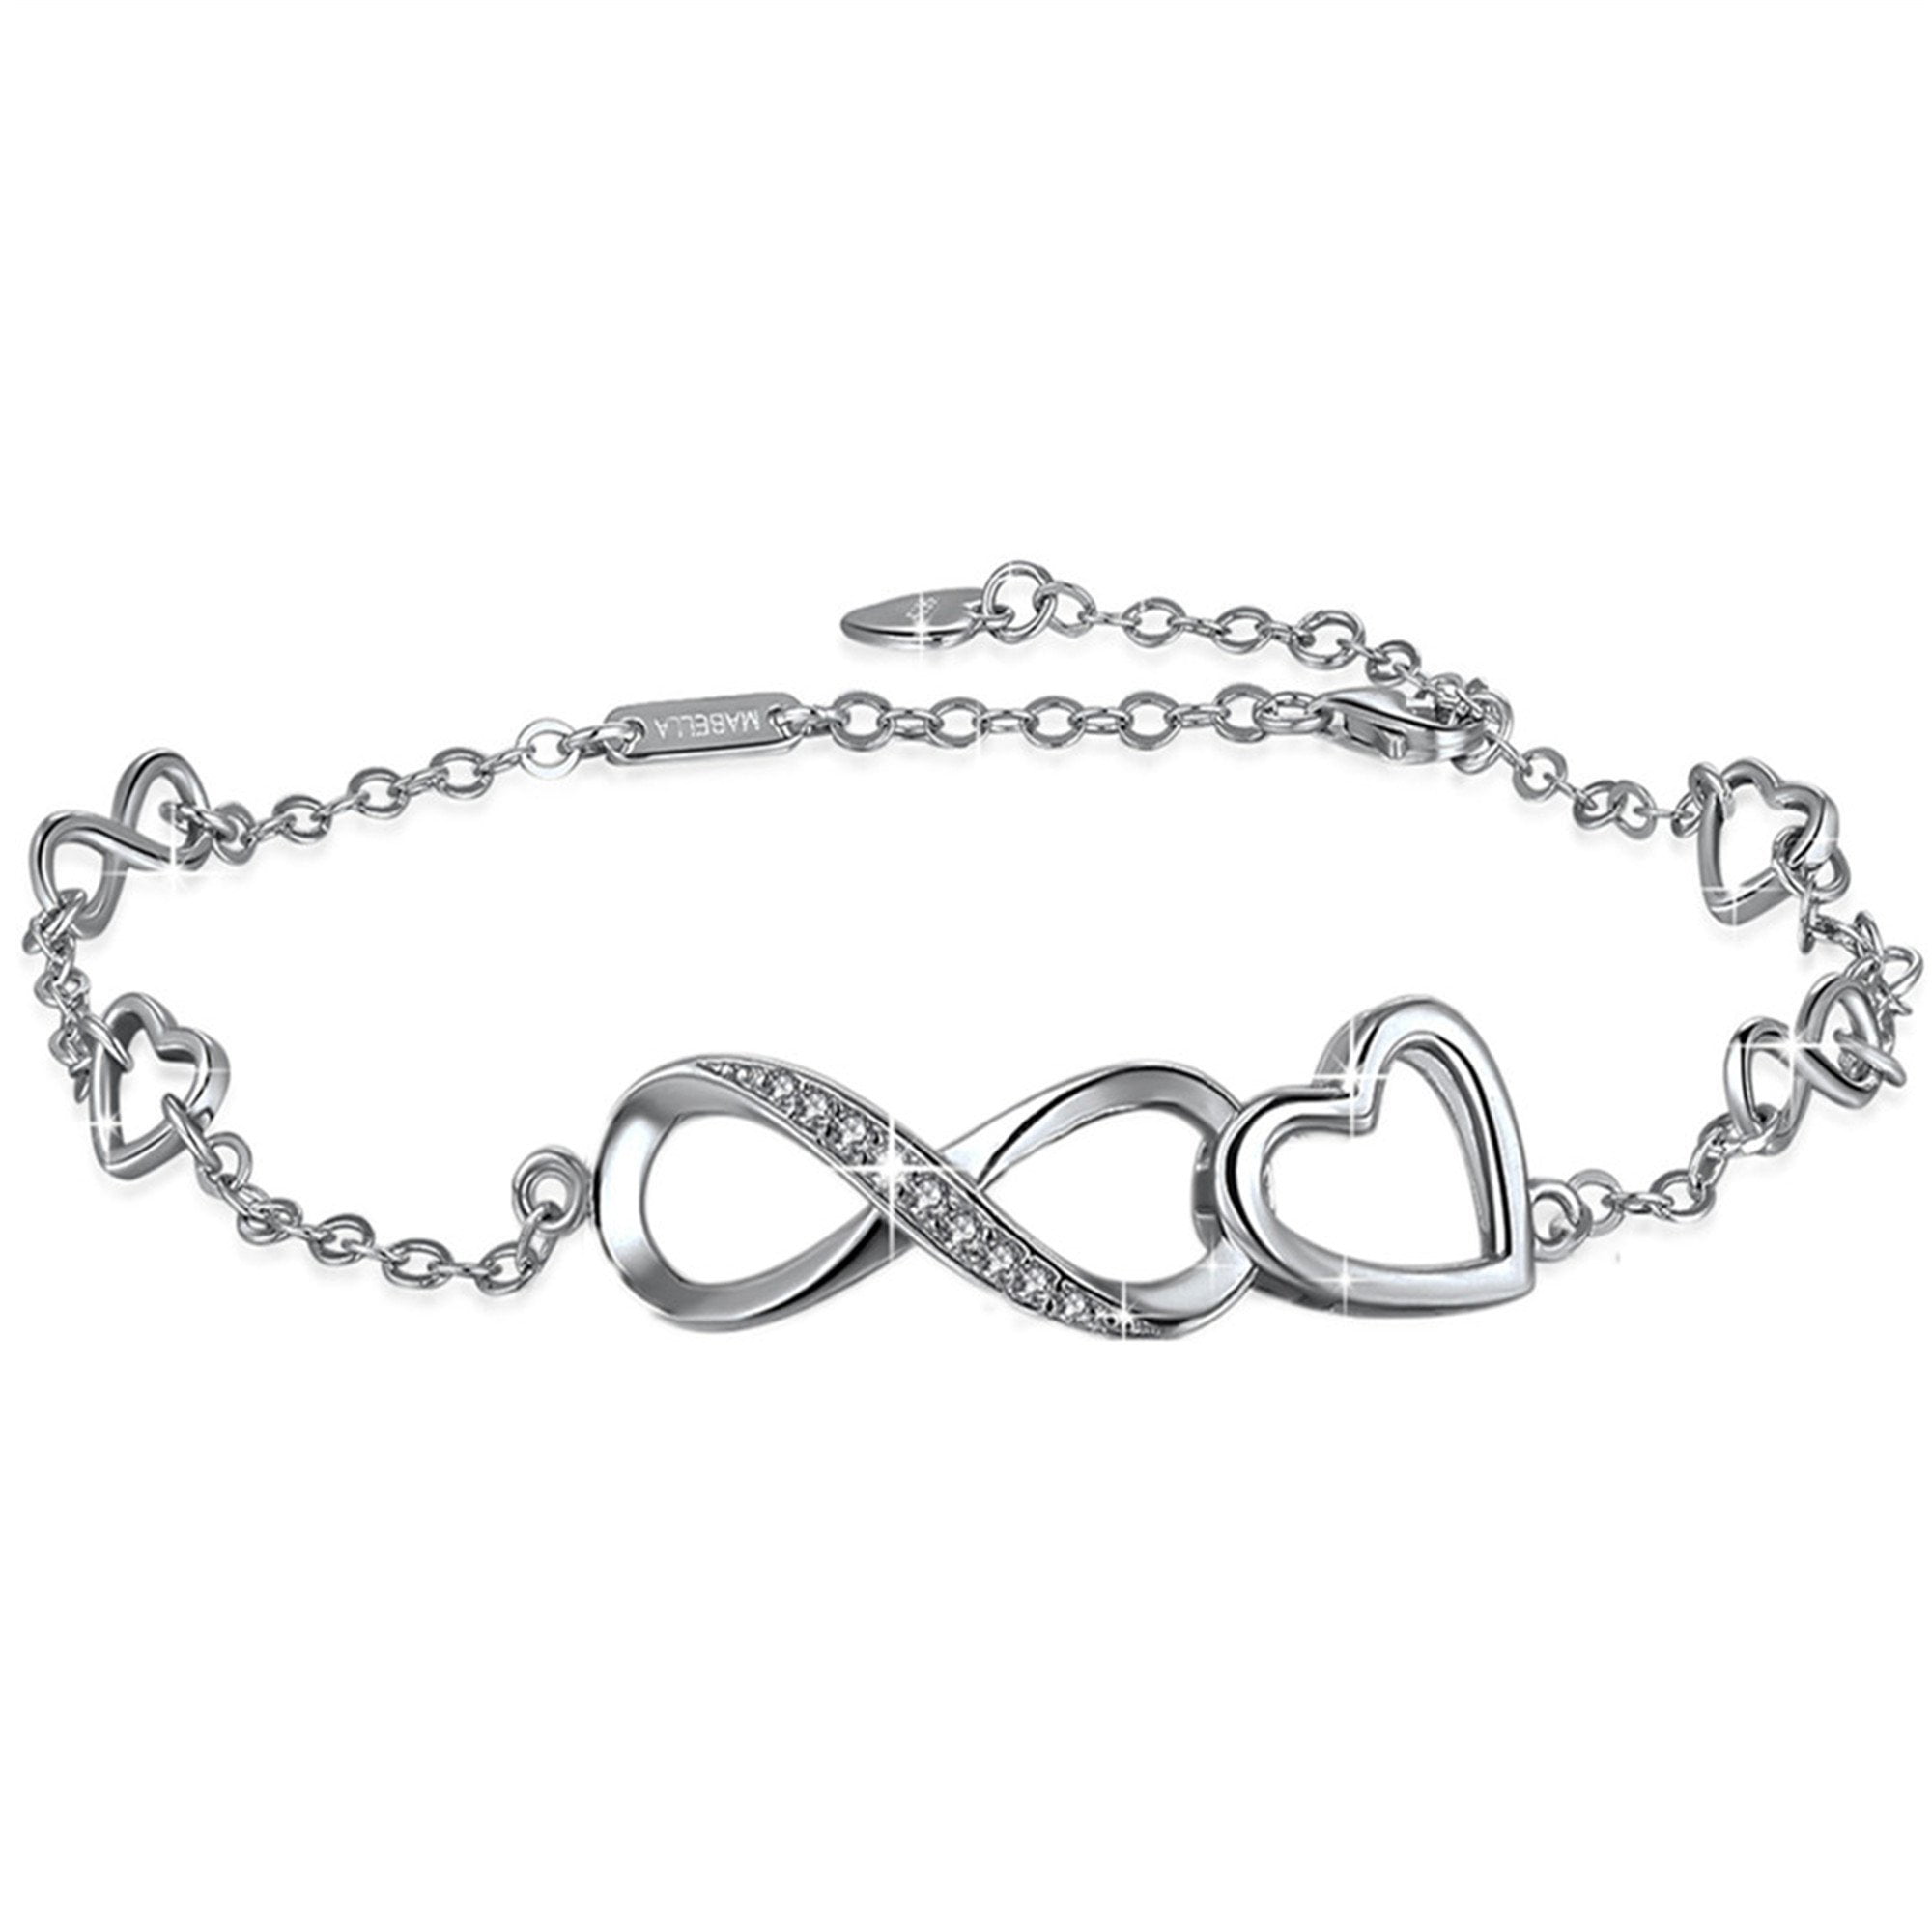 S925 Sterling Silver Ankle Bracelets for Women,Infinity Anklet with Heart Design Charm Jewelry,Gift for Women Mother 